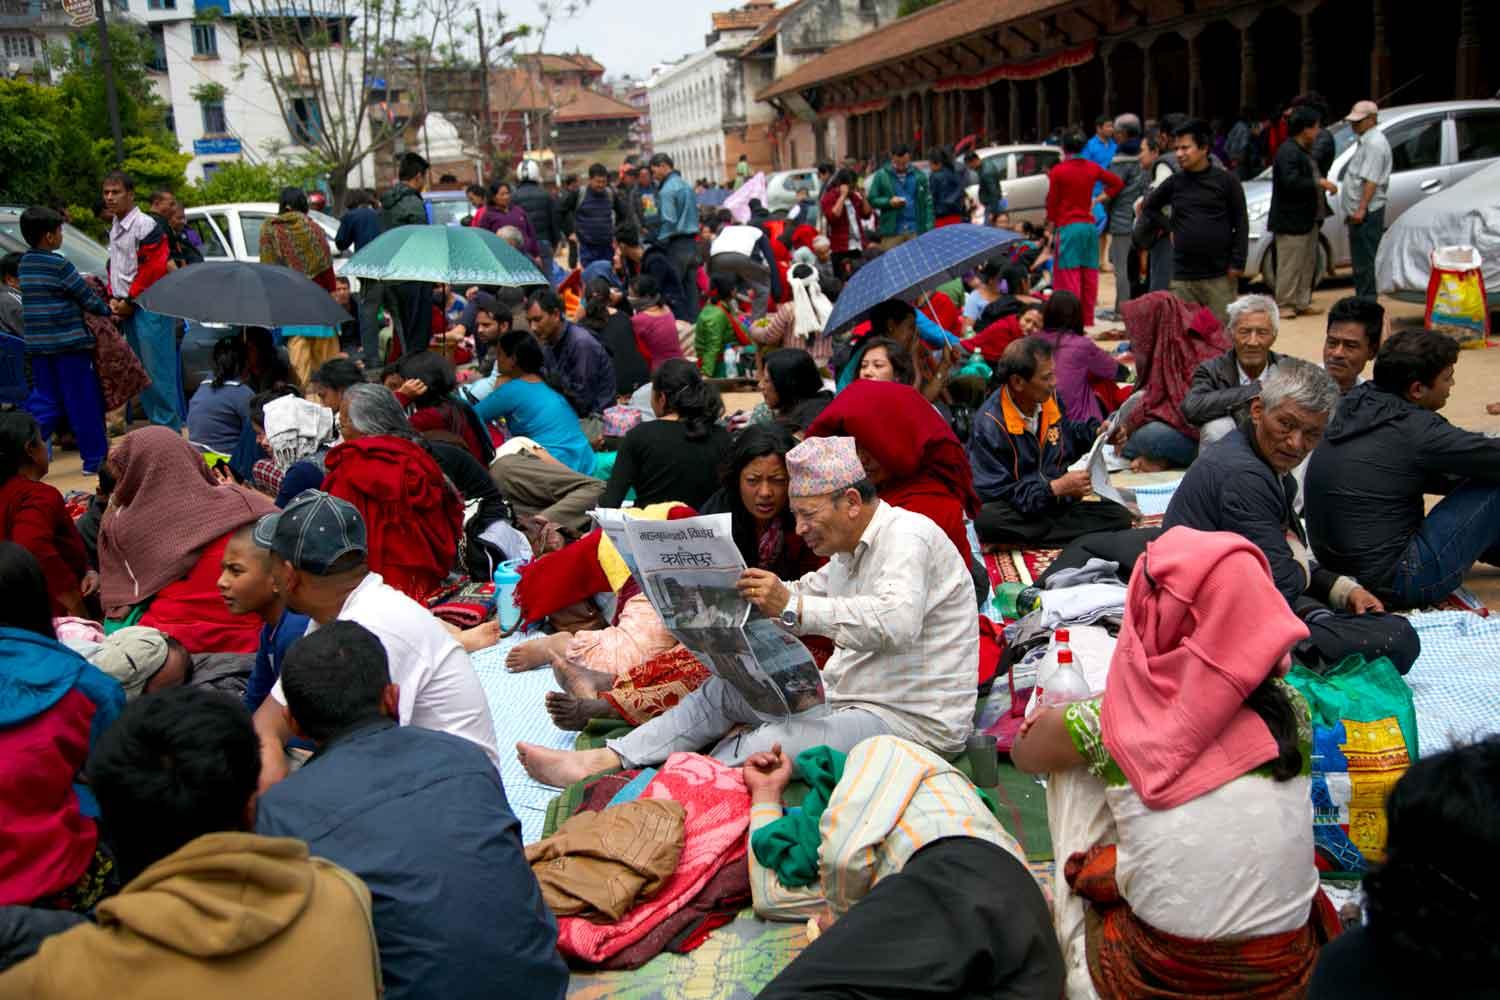 Nepalese waiting in open areas away from buildings, at Patan Durbar square, the day after the quake